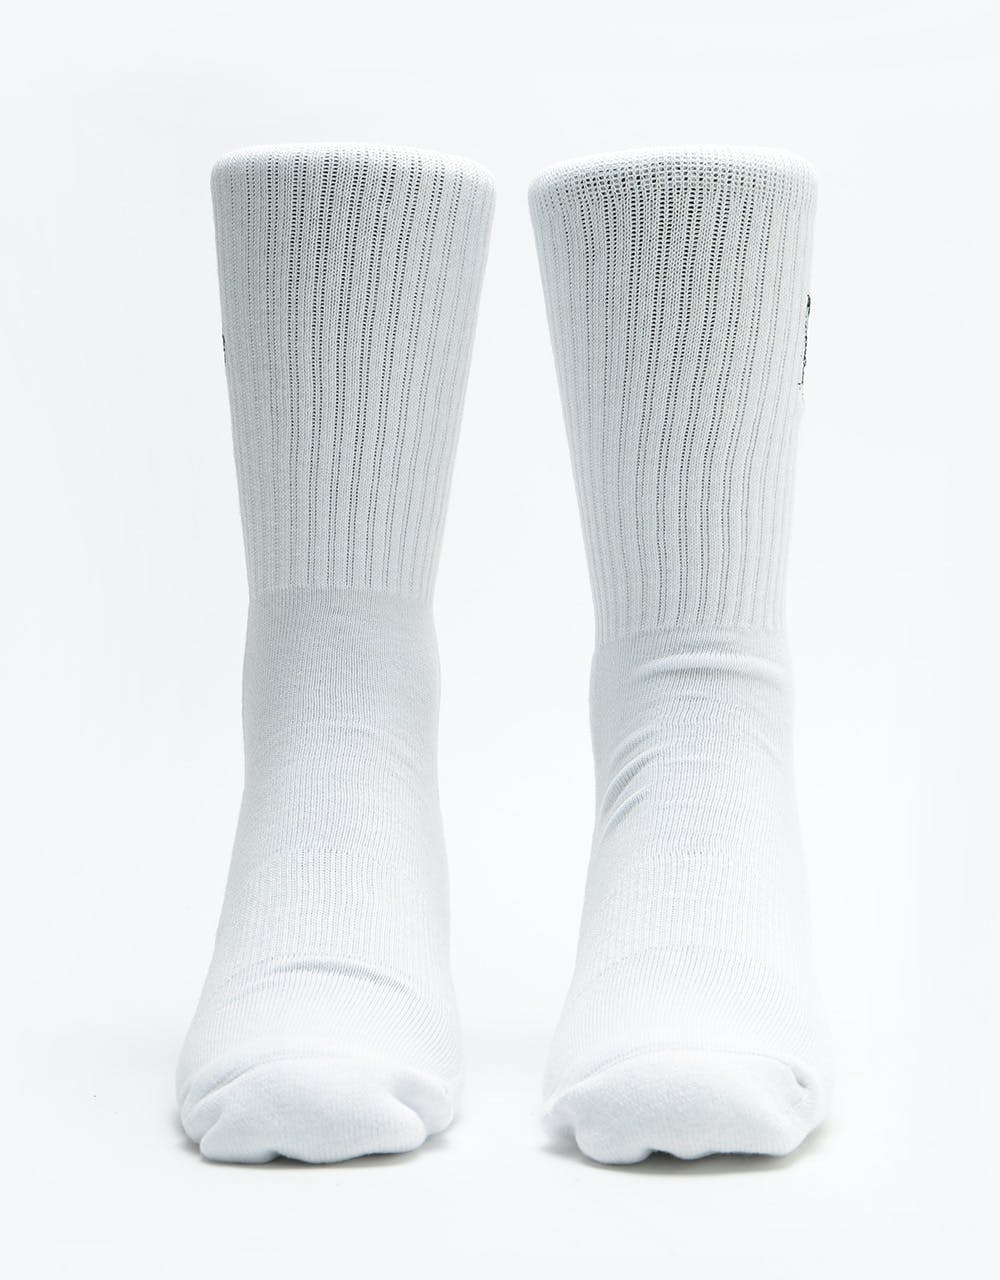 Route One Butterfly Socks - White